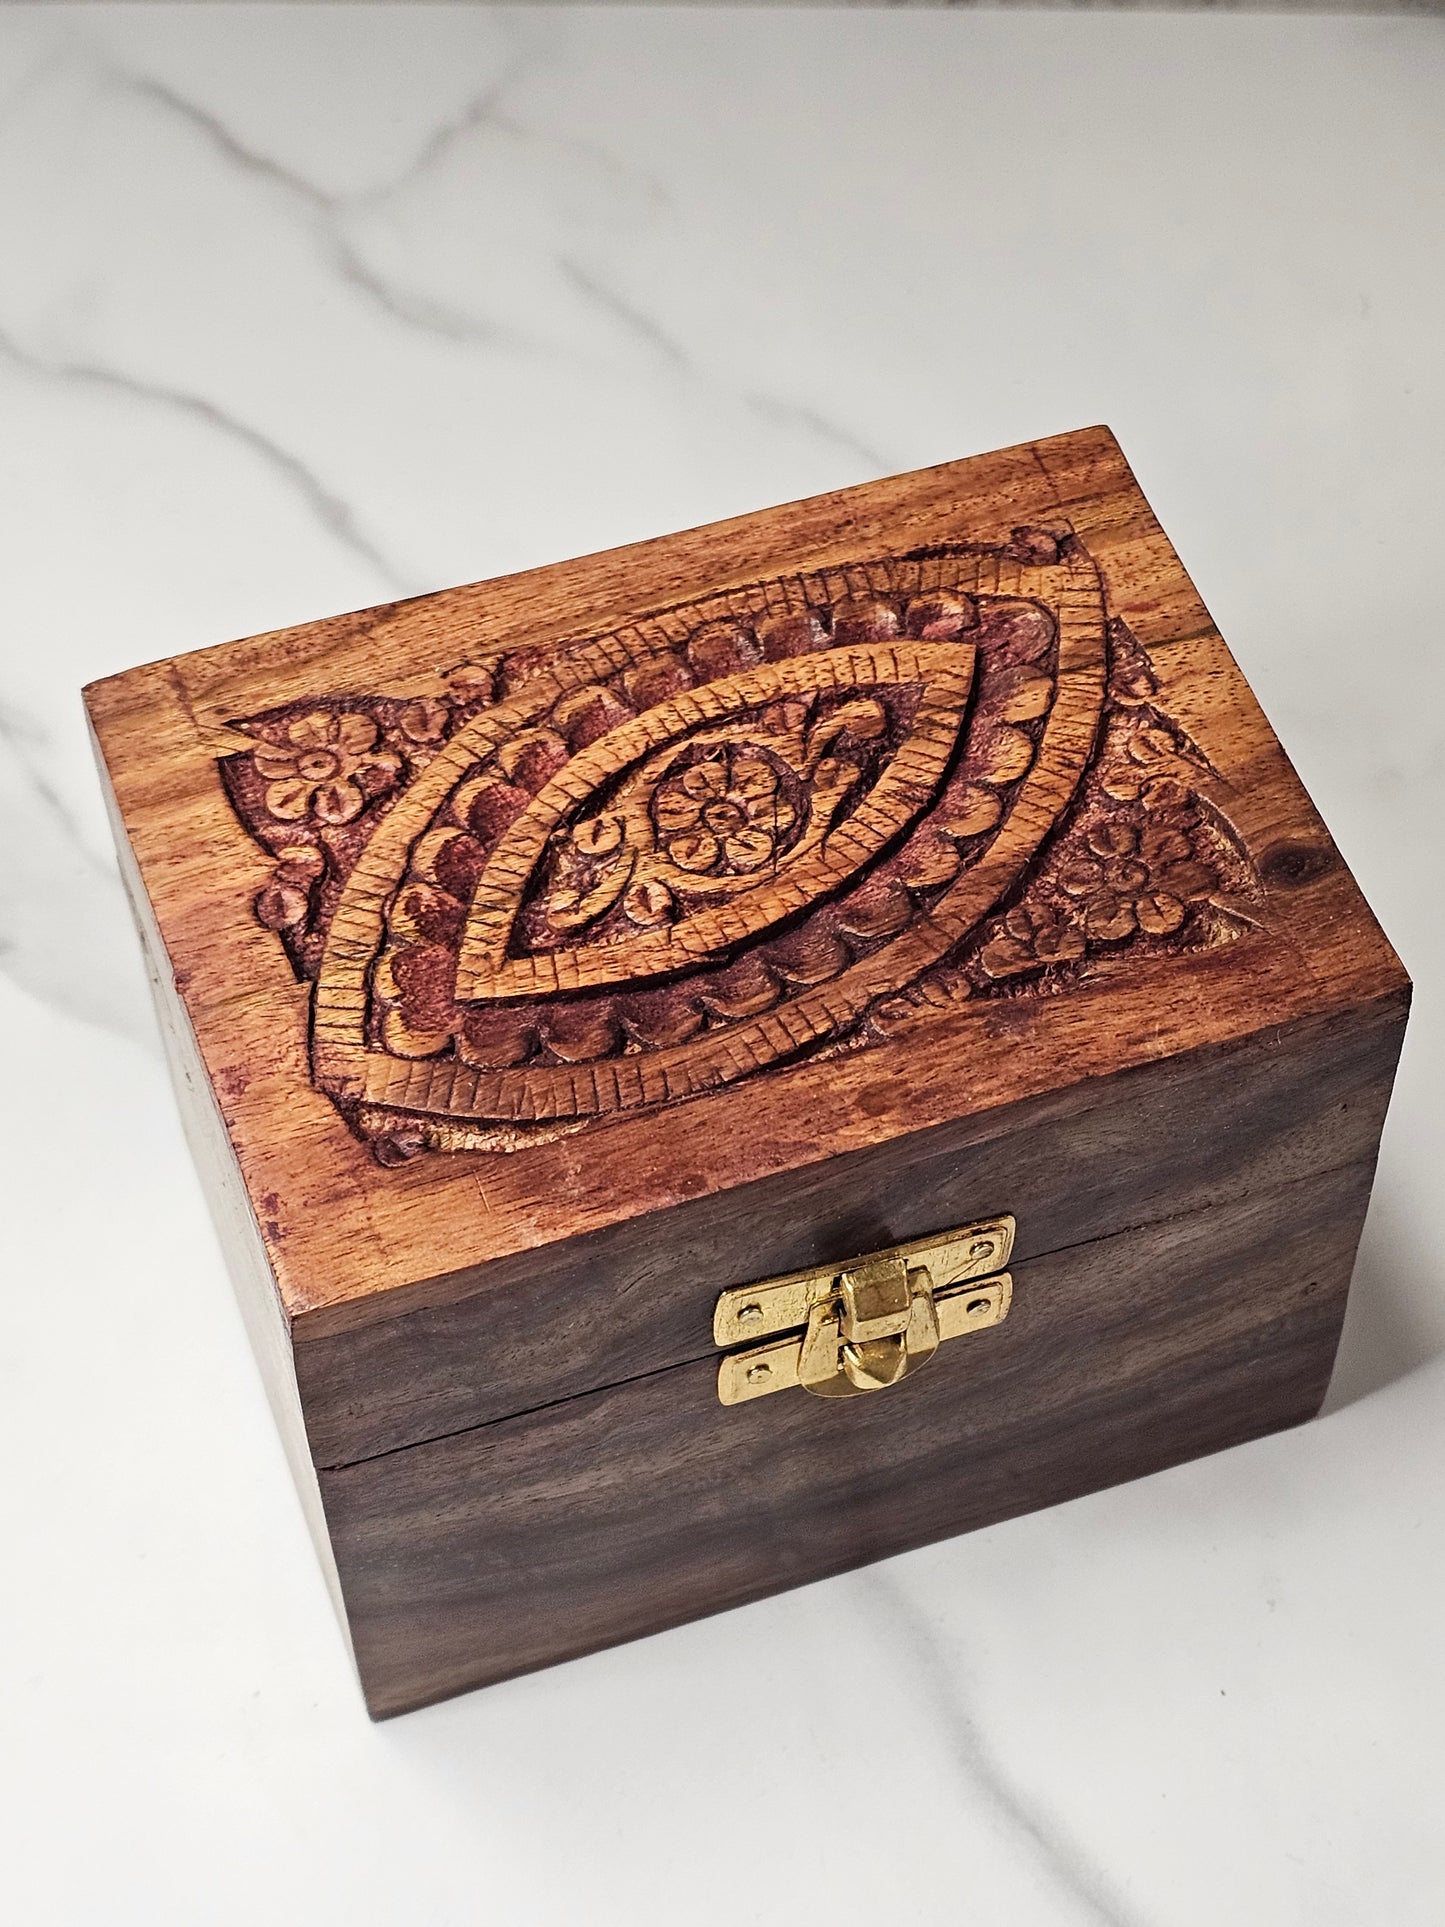 Wooden Carved Sectioned Box - Eye and Floral Design